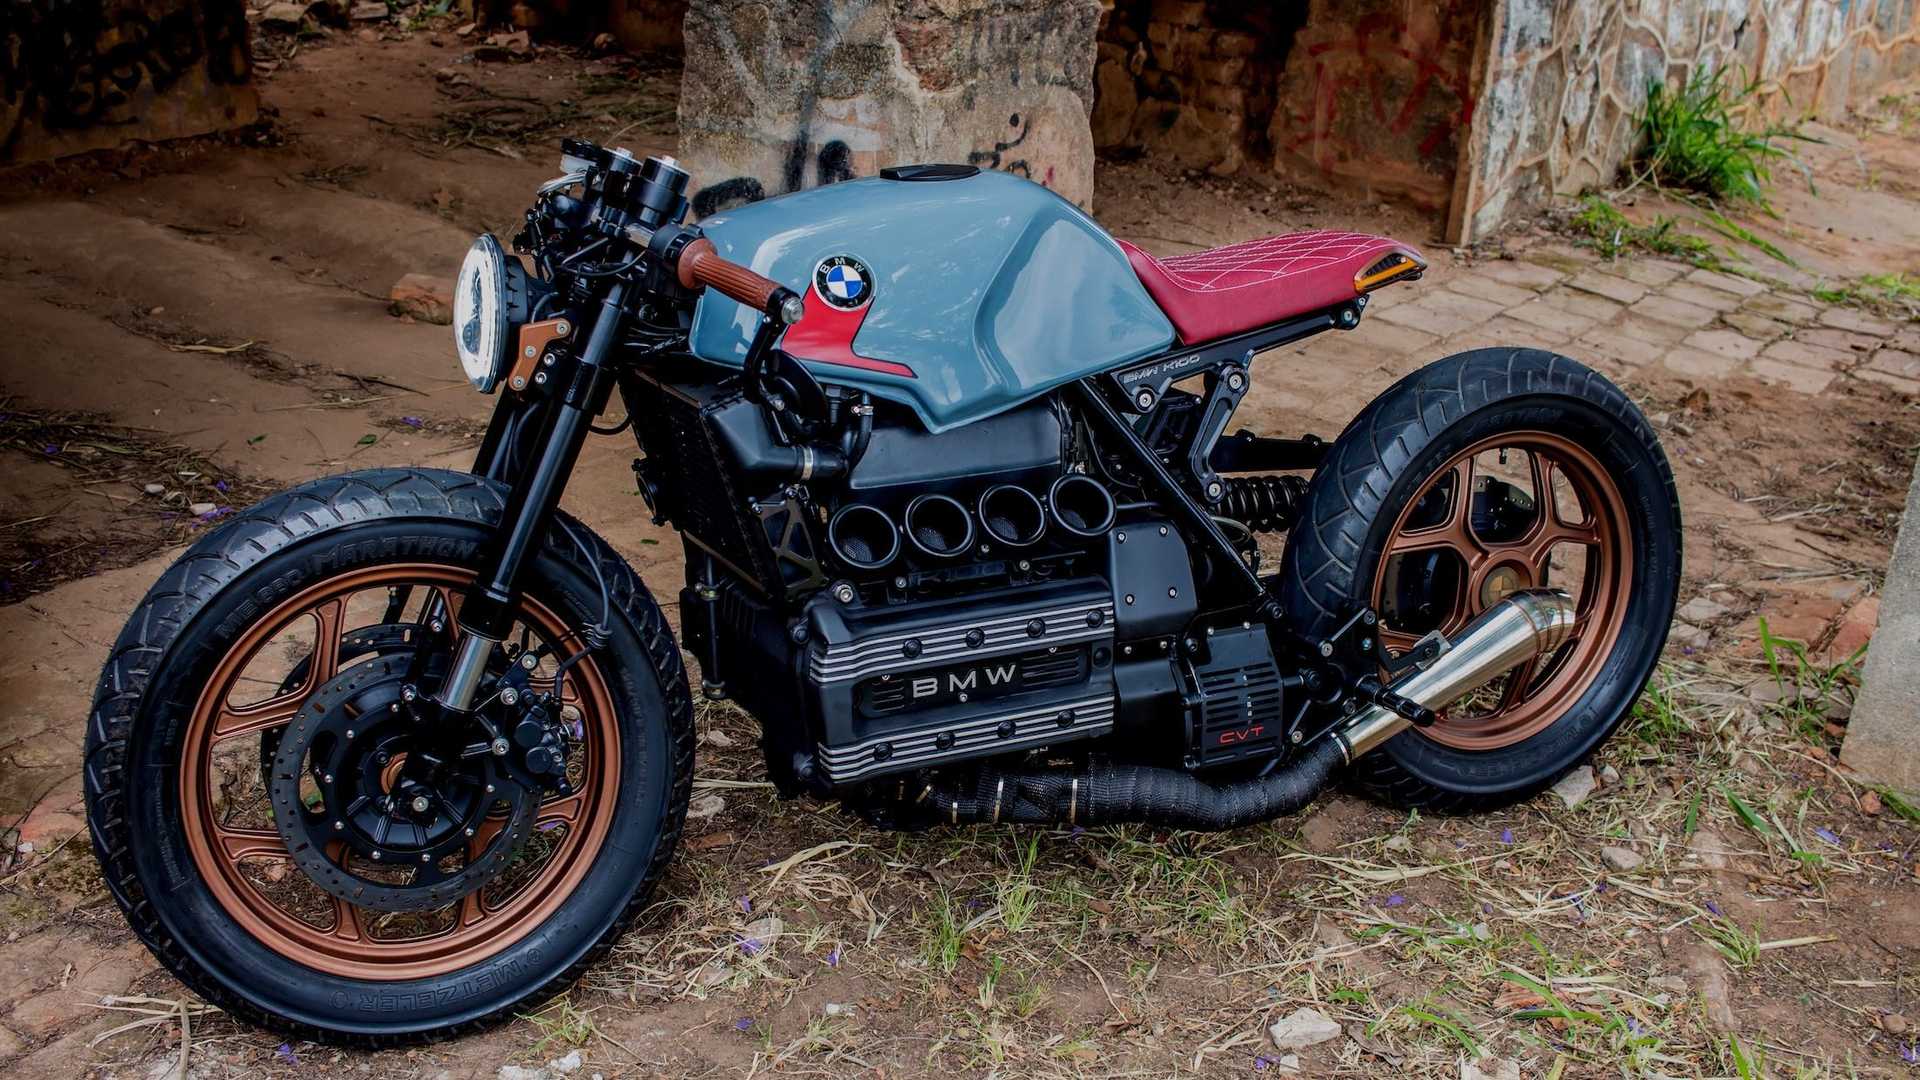 This K100 Will Change How You Look At CVT Motorcycles